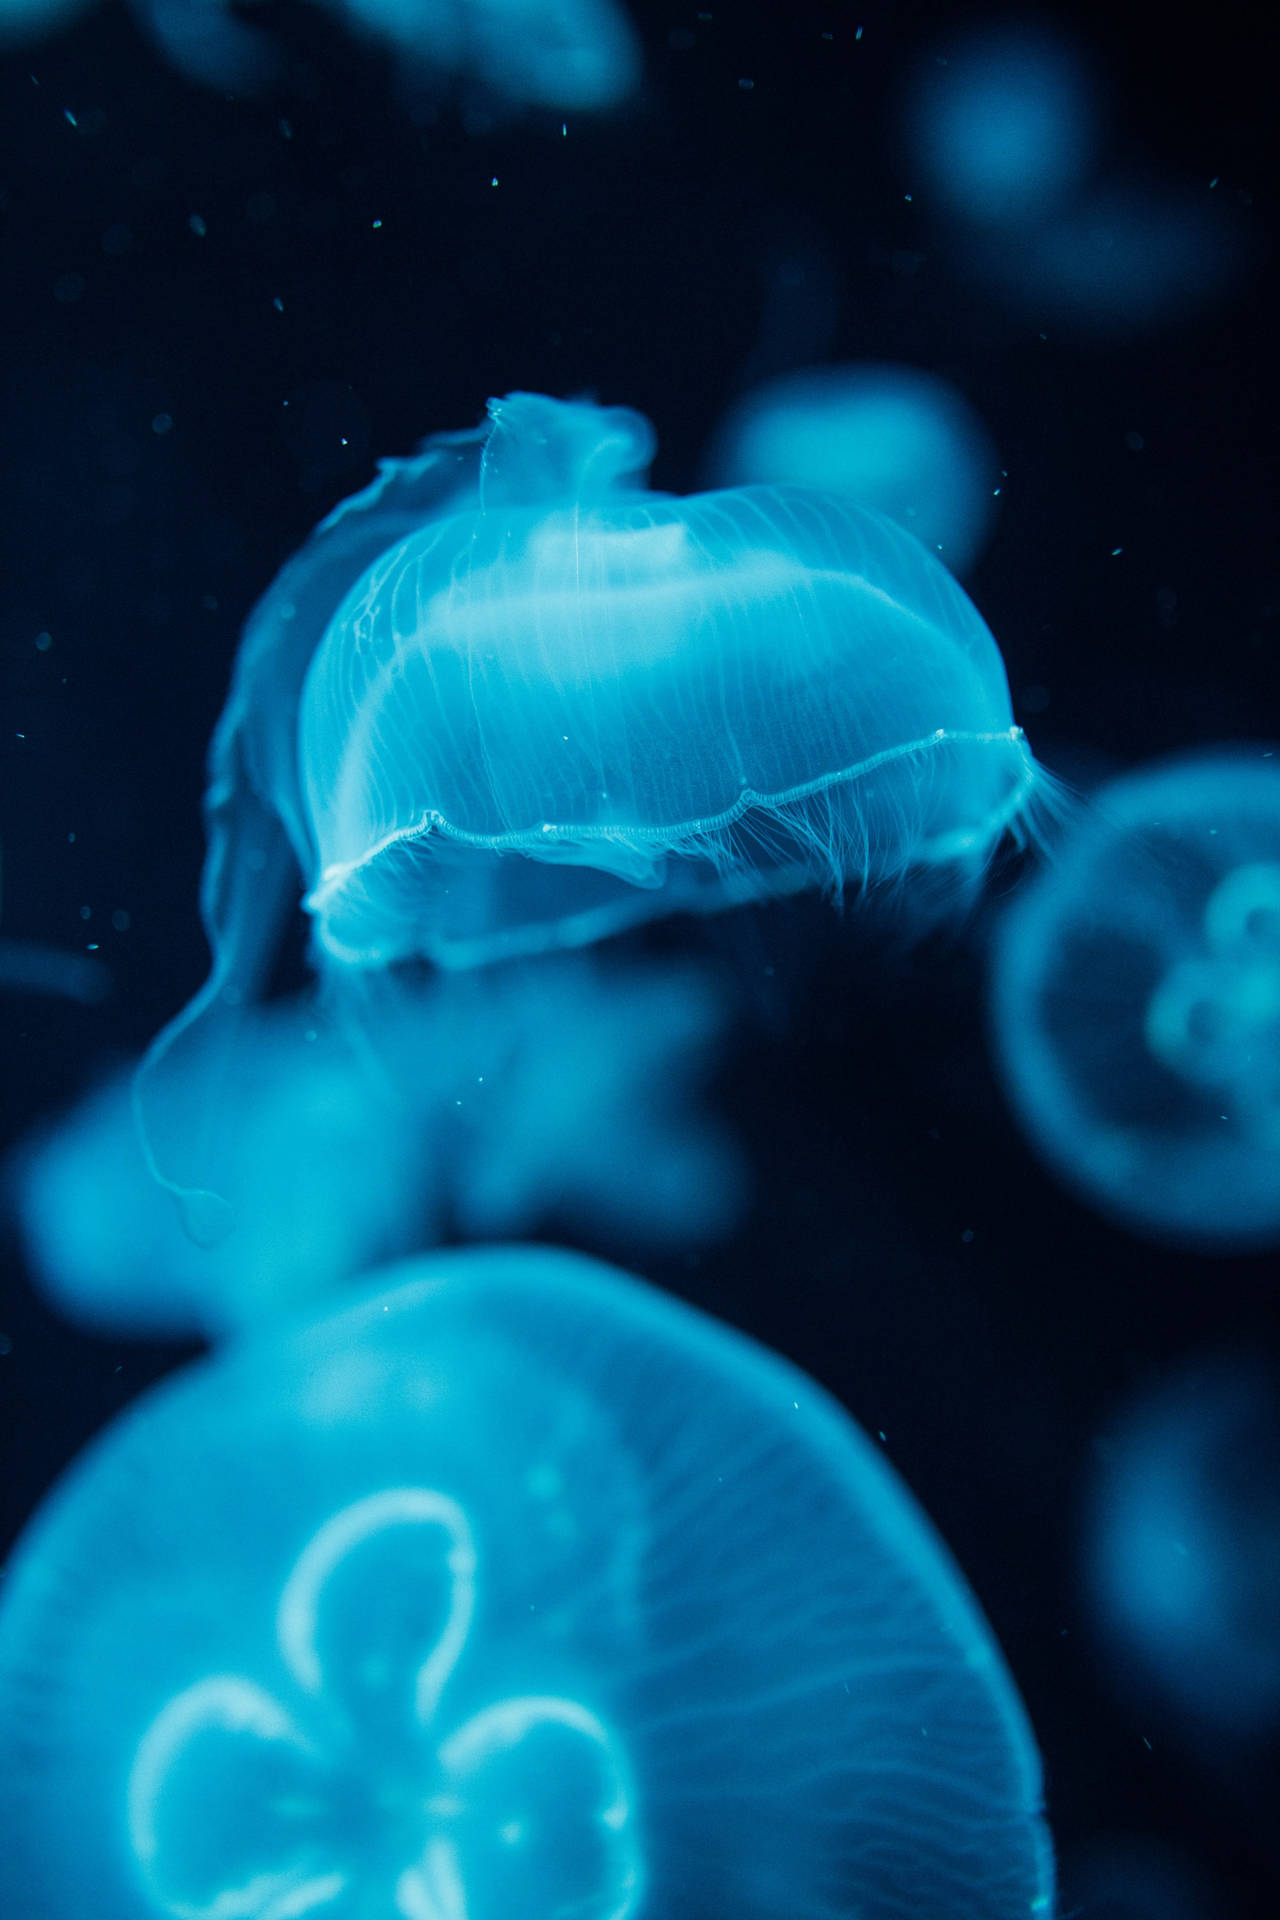 Luminous Jellyfishes In Ocean Blue Waters Background